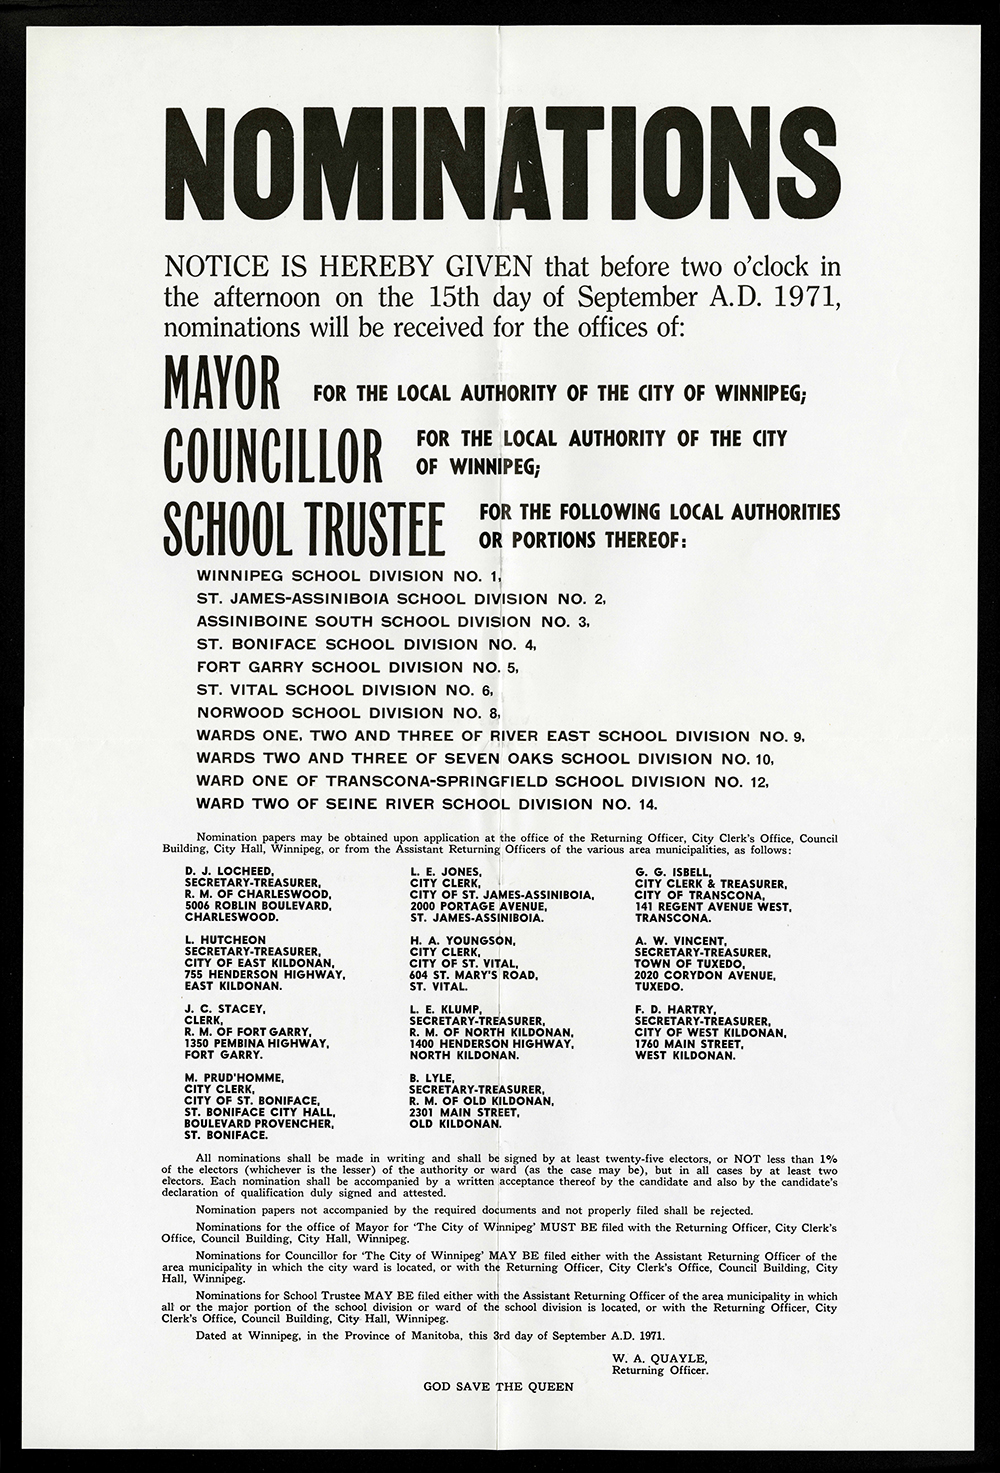 Notice  of nominations for Mayor, Councillor, and School Trustee 
Item dated September 3, 1971 
COWA, City of Winnipeg fonds, Election Records, Election Working Papers, Box A825, File 2
